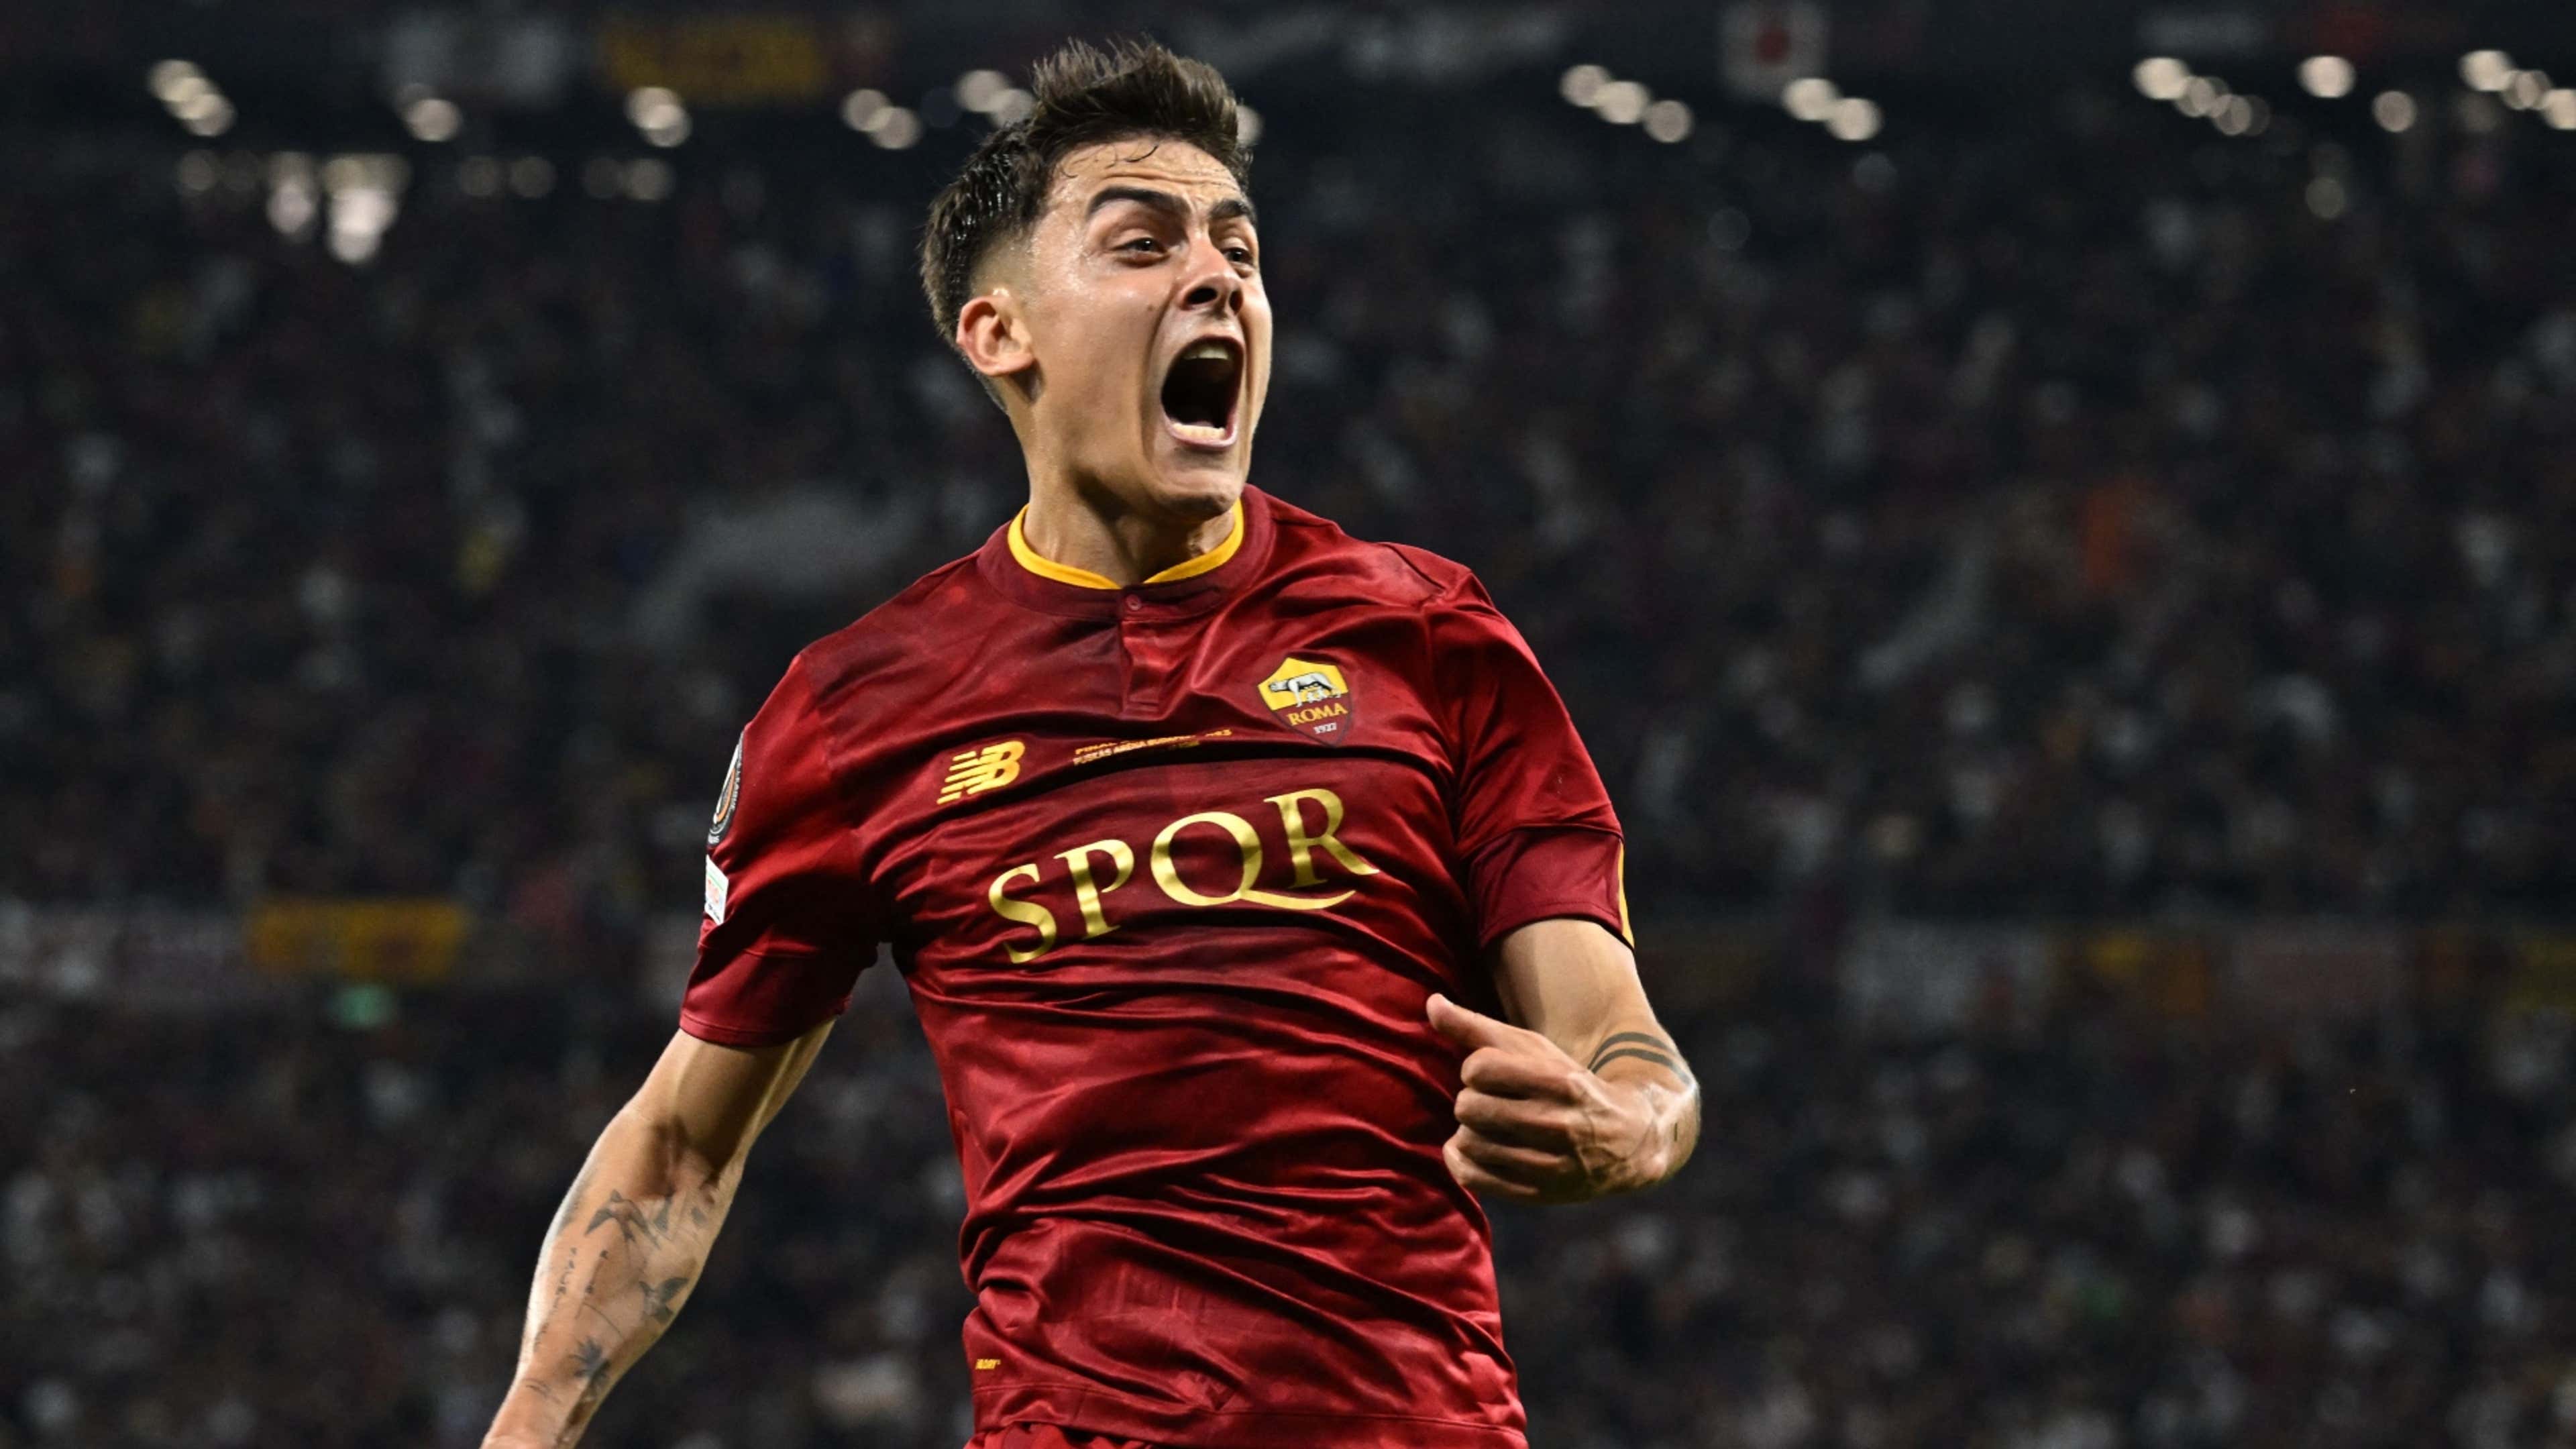 Explained: Why Roma are wearing the letters 'SPQR' on their shirts